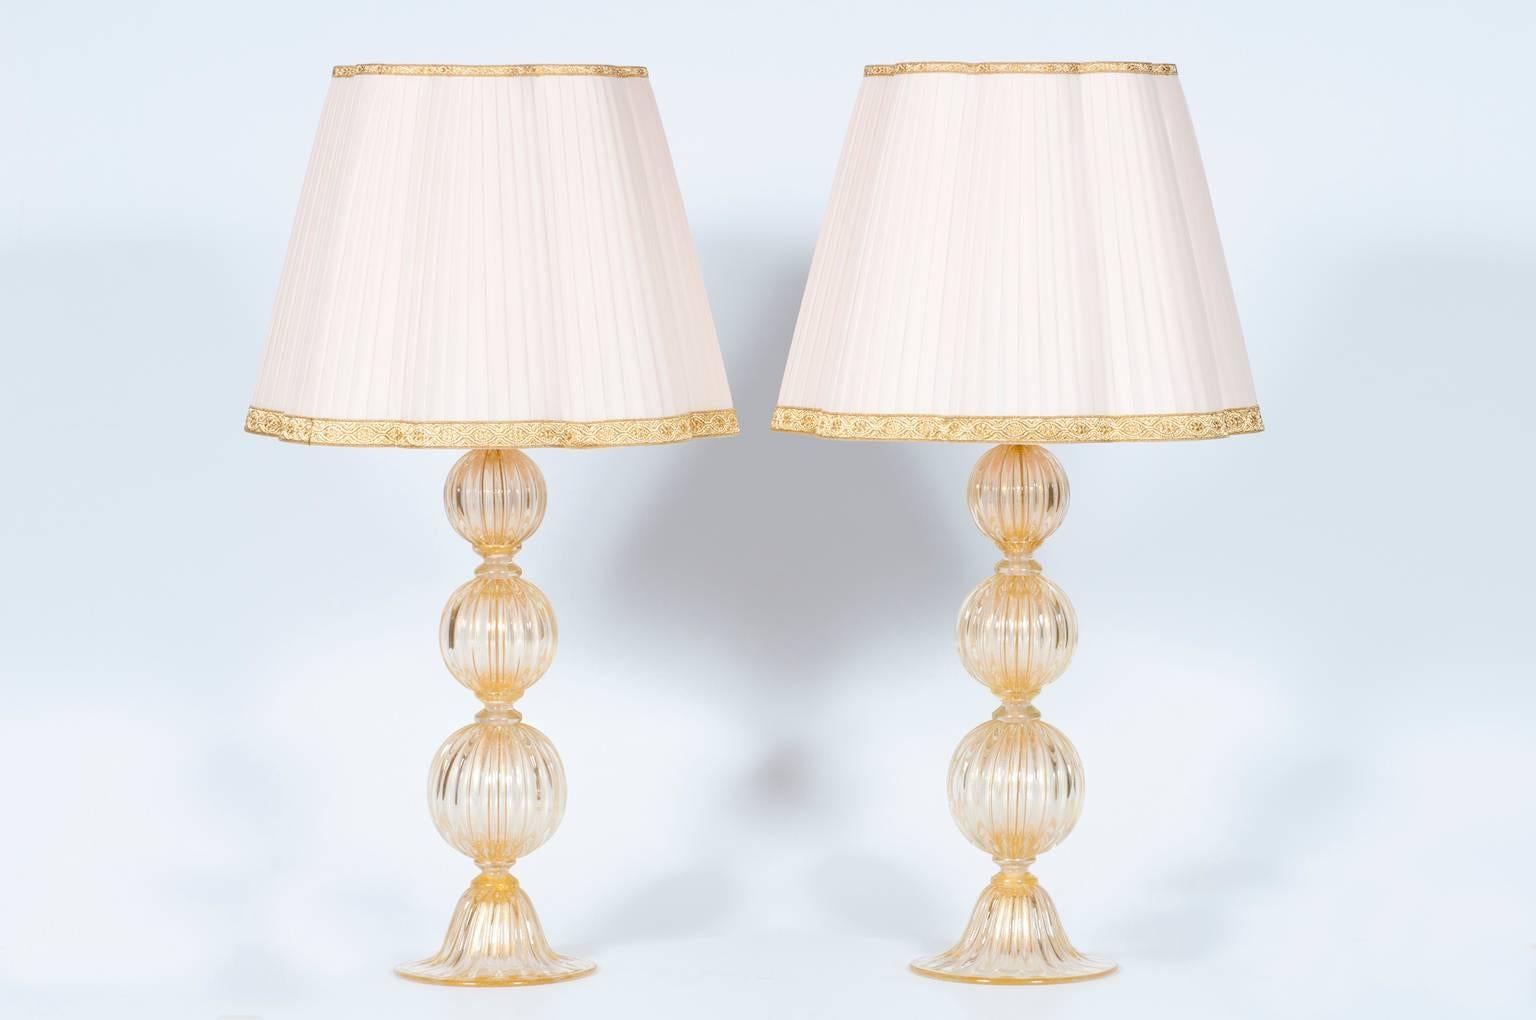 Elegant pair of Italian table lamps in Murano glass 24-carat gold, composed of a base, and from three spheres, in 24-carat gold Murano glass with stripes. All parts were made and realized in the Murano island, circa 1980s by blowing and handmade.